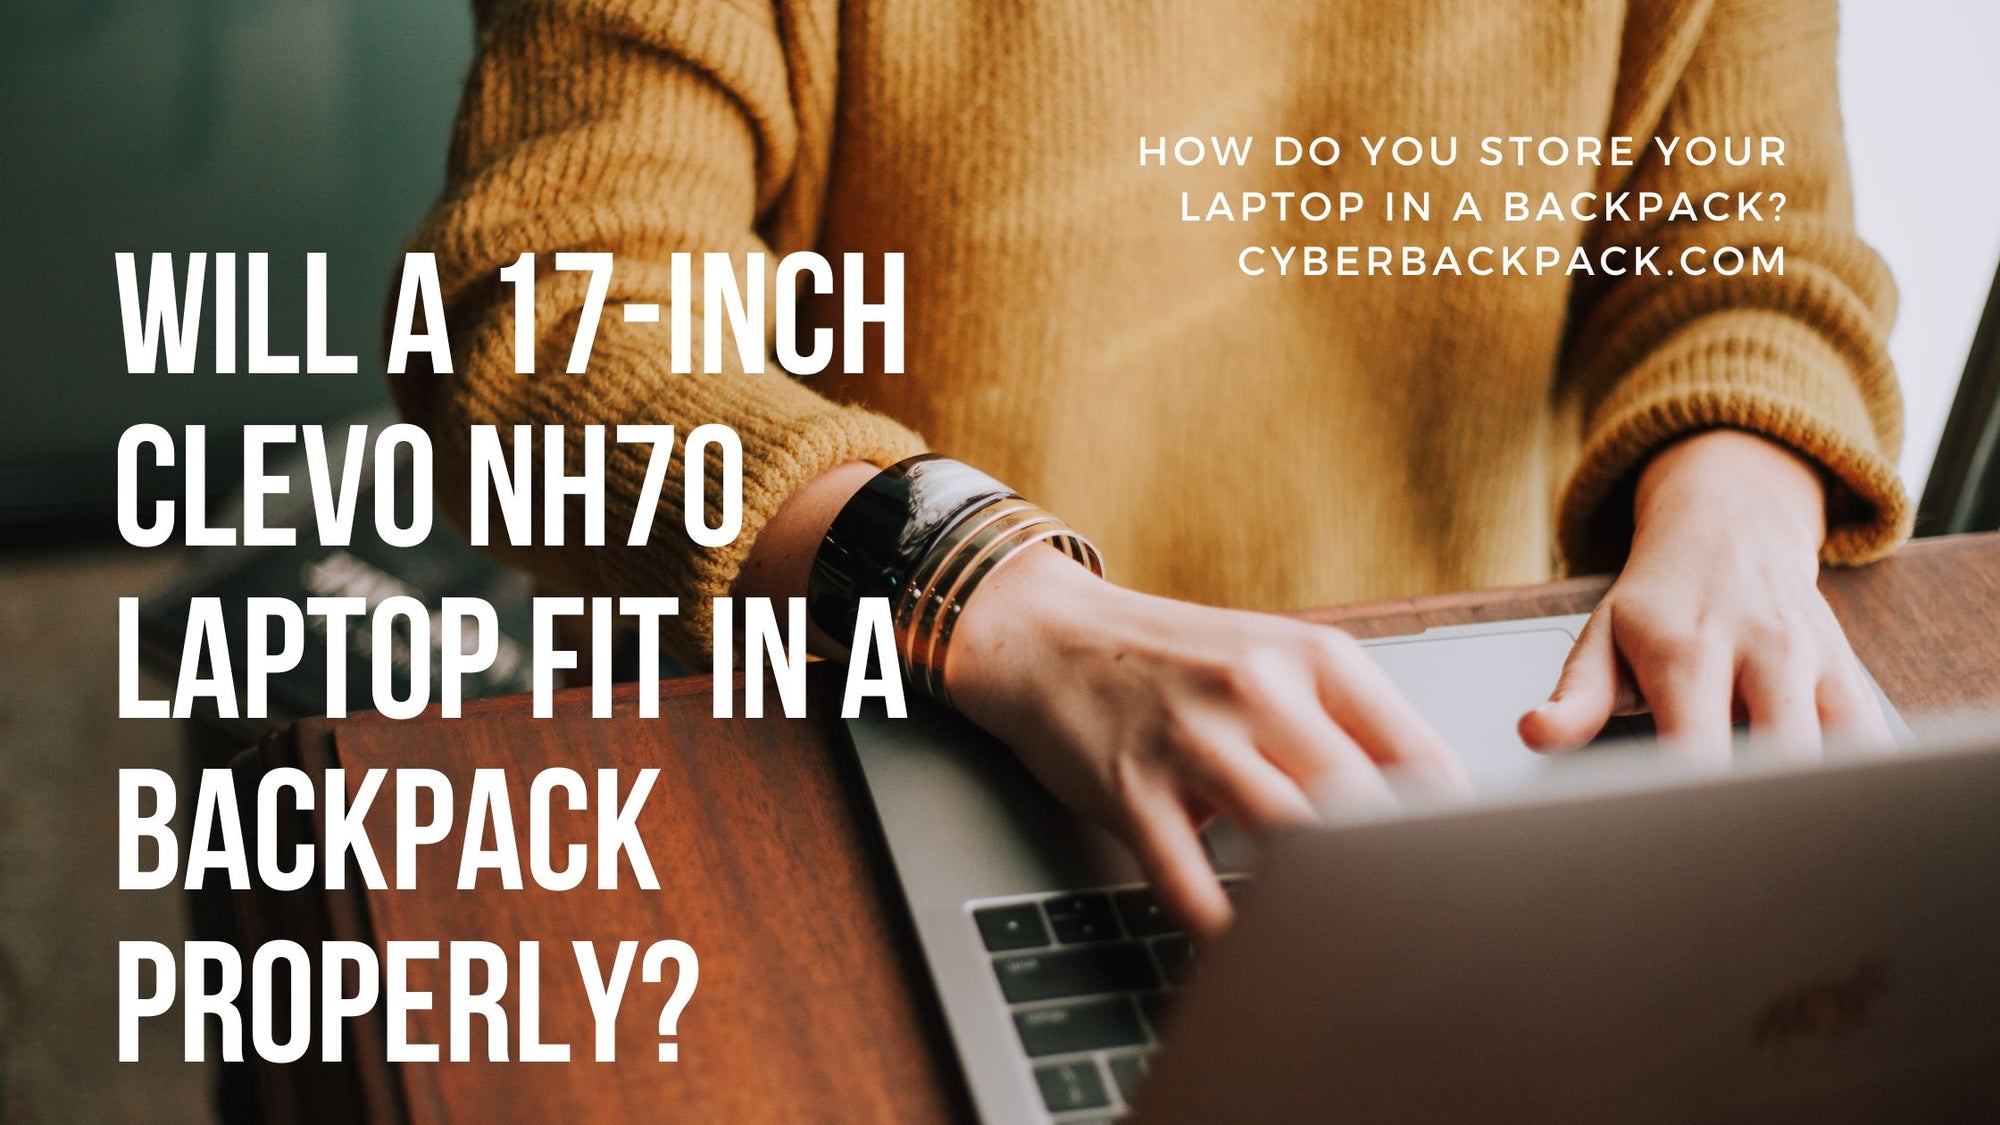 Will a 17-Inch Clevo NH70 Laptop Fit in a Backpack Properly?